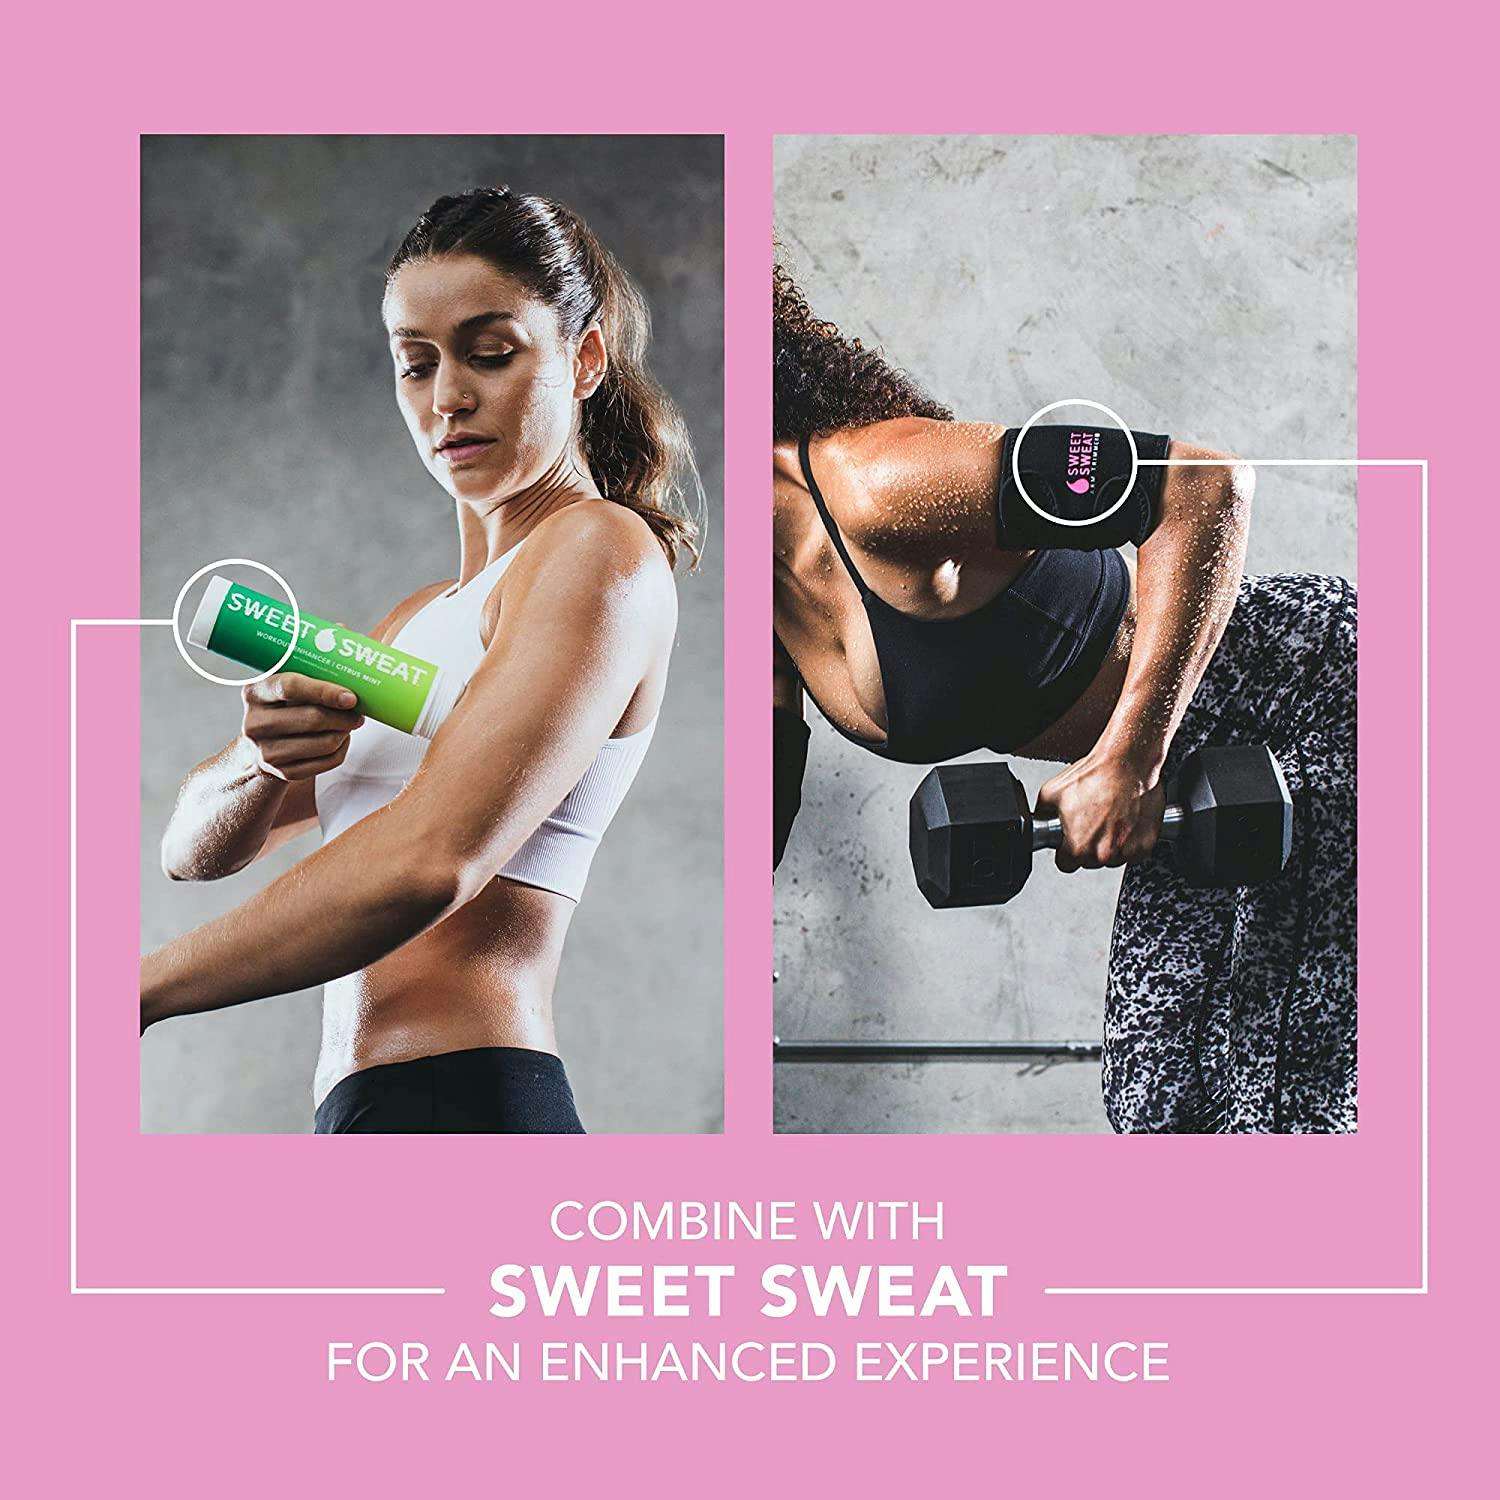 Woman applying Sweet Sweat® topical gel to her upper arm, and another woman with Sweet Sweat® arm trimmer on her upper arm lifting a dumbbell.